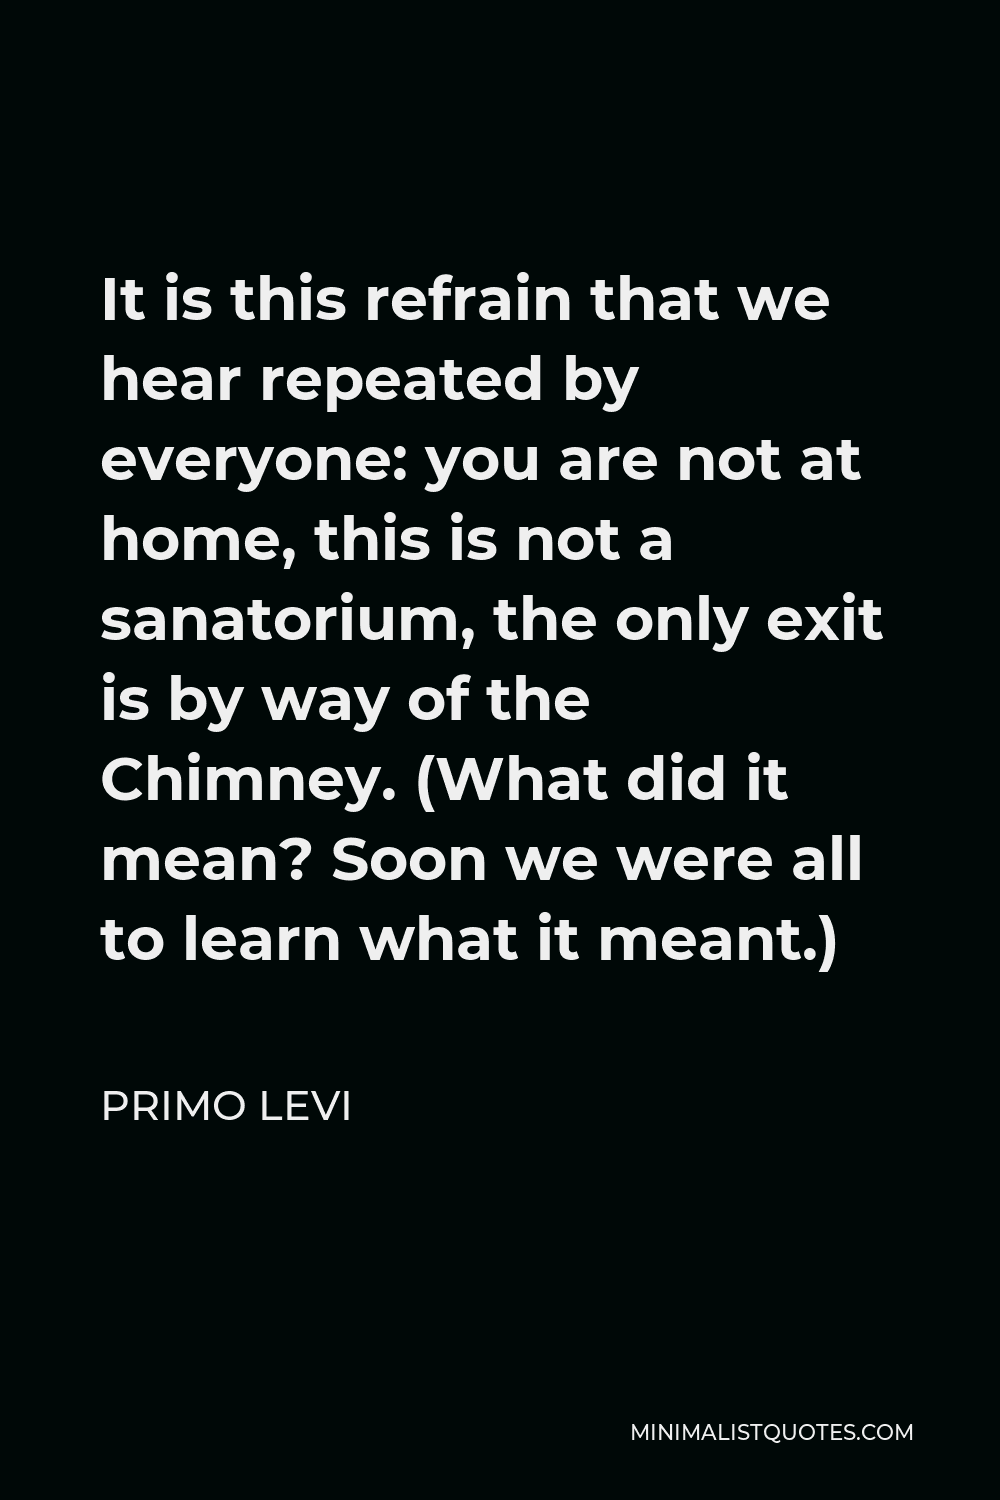 Primo Levi Quote - It is this refrain that we hear repeated by everyone: you are not at home, this is not a sanatorium, the only exit is by way of the Chimney. (What did it mean? Soon we were all to learn what it meant.)